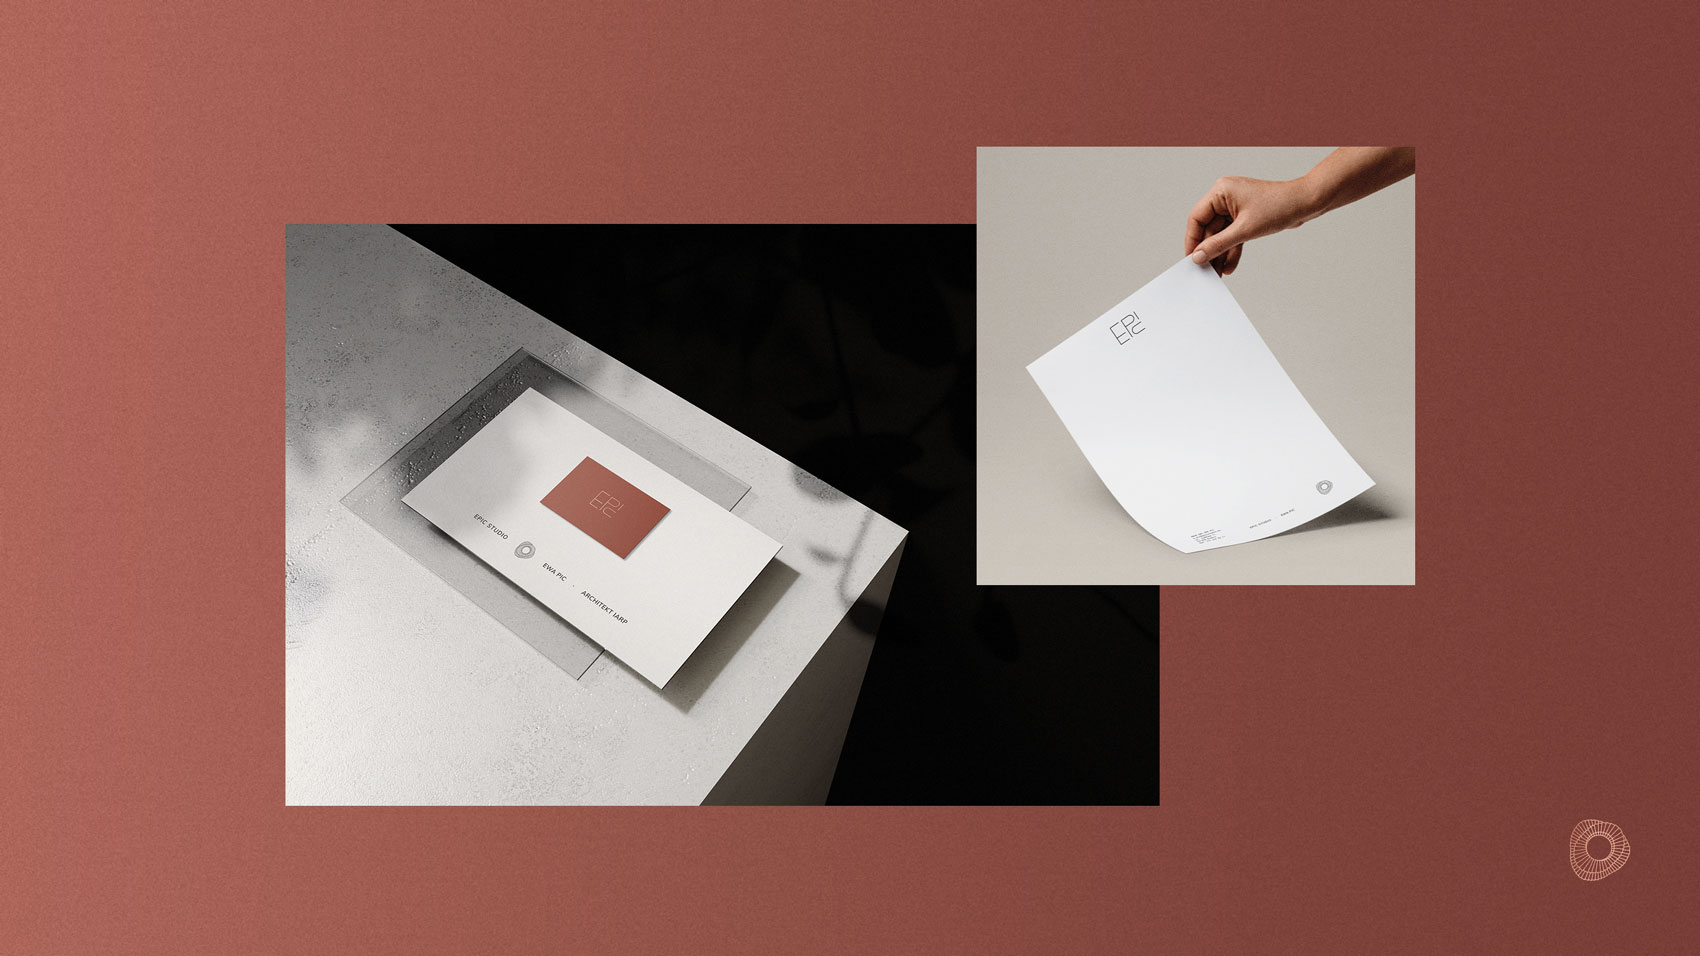 Visual identity for an architectural studio.